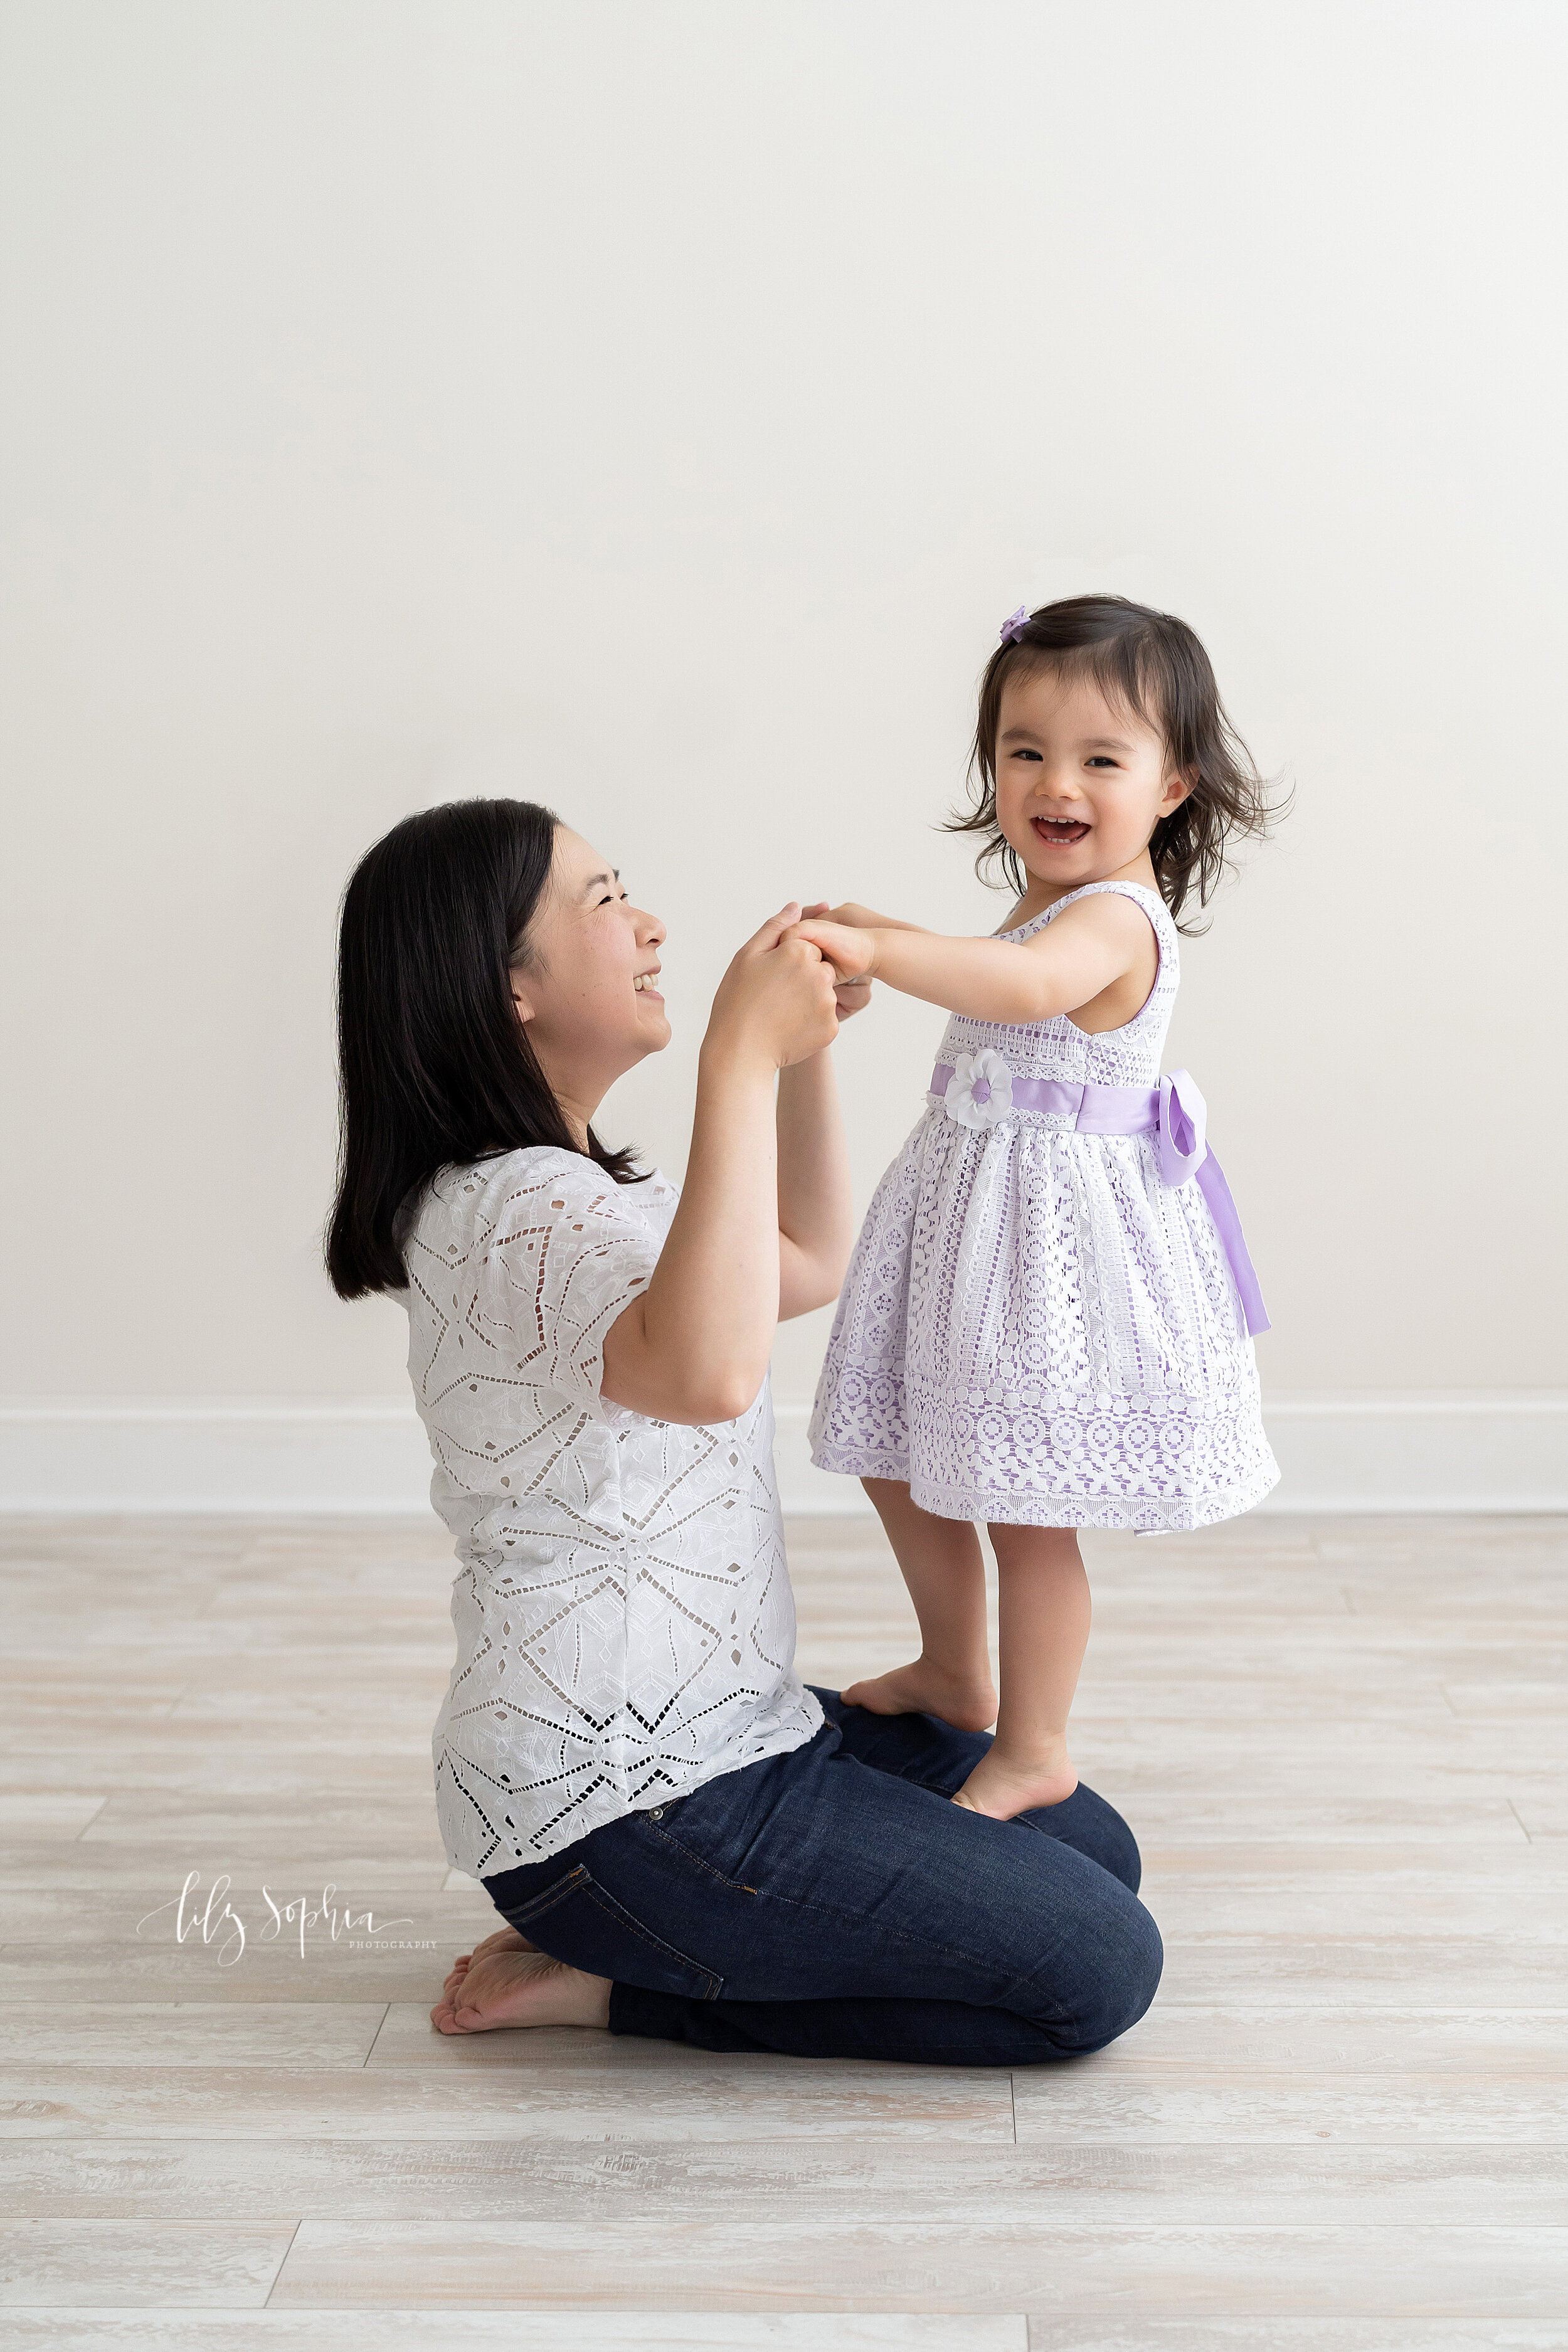  Family photo of an Asian mother sitting on the floor of a natural light studio in a white short-sleeved shirt and blue jeans with her two-year old daughter dressed in a sleeveless lilac dress covered in lace standing on her knees and holding her han